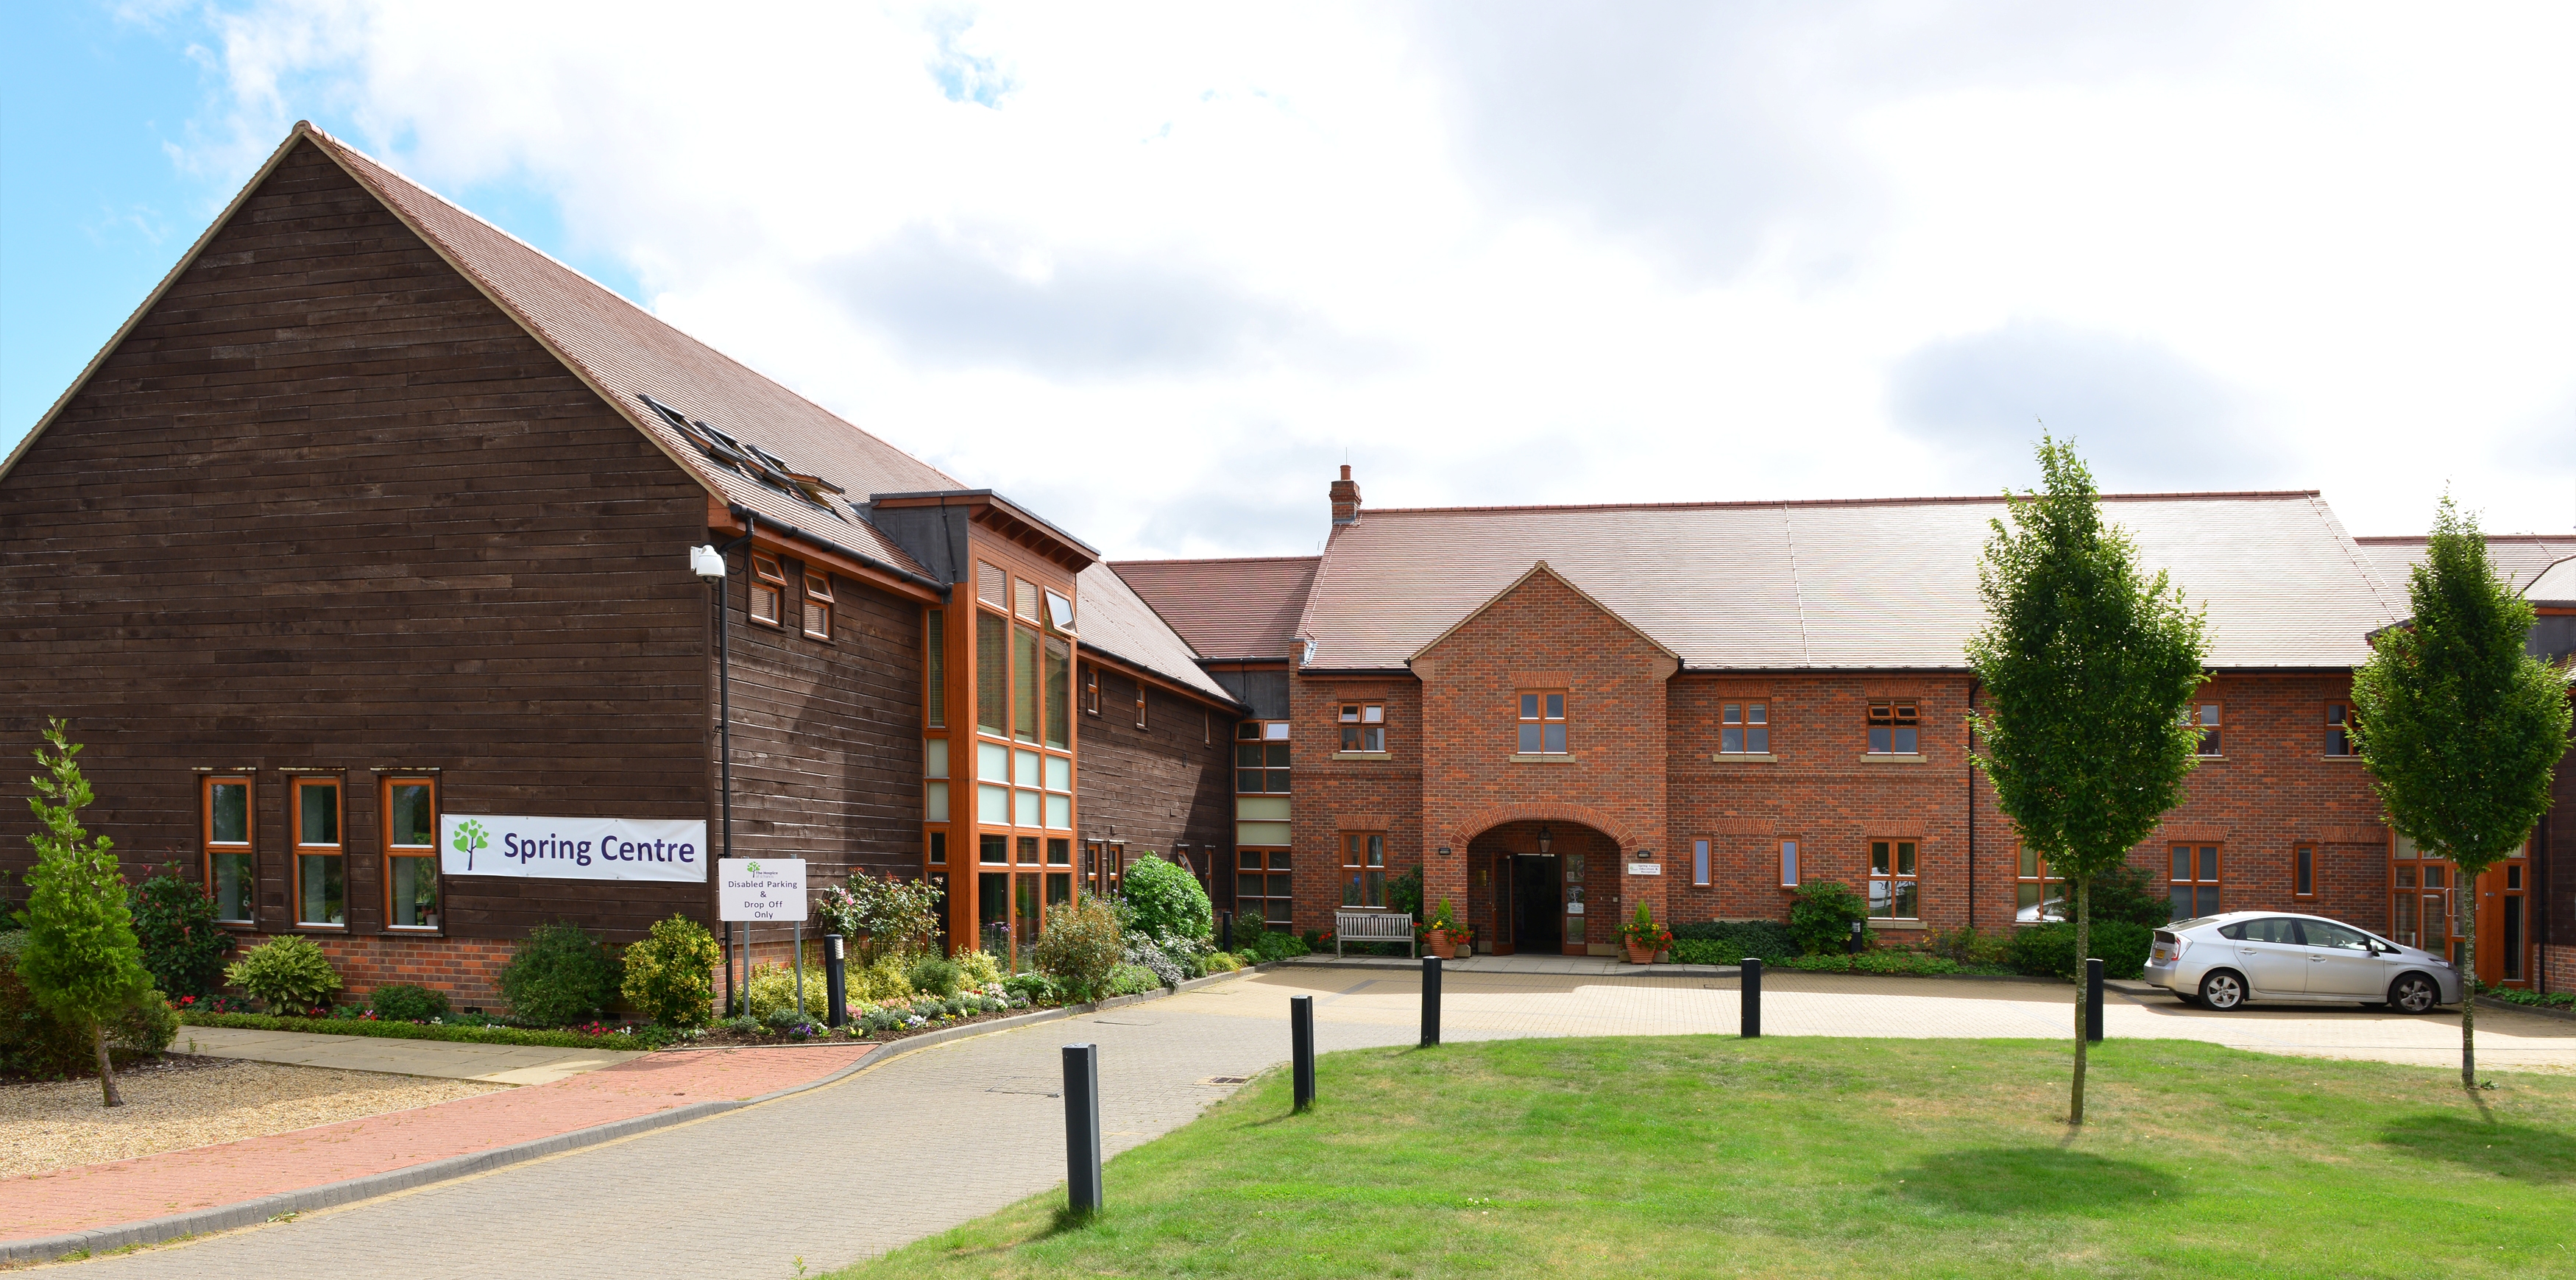 The Hospice of St Francis building